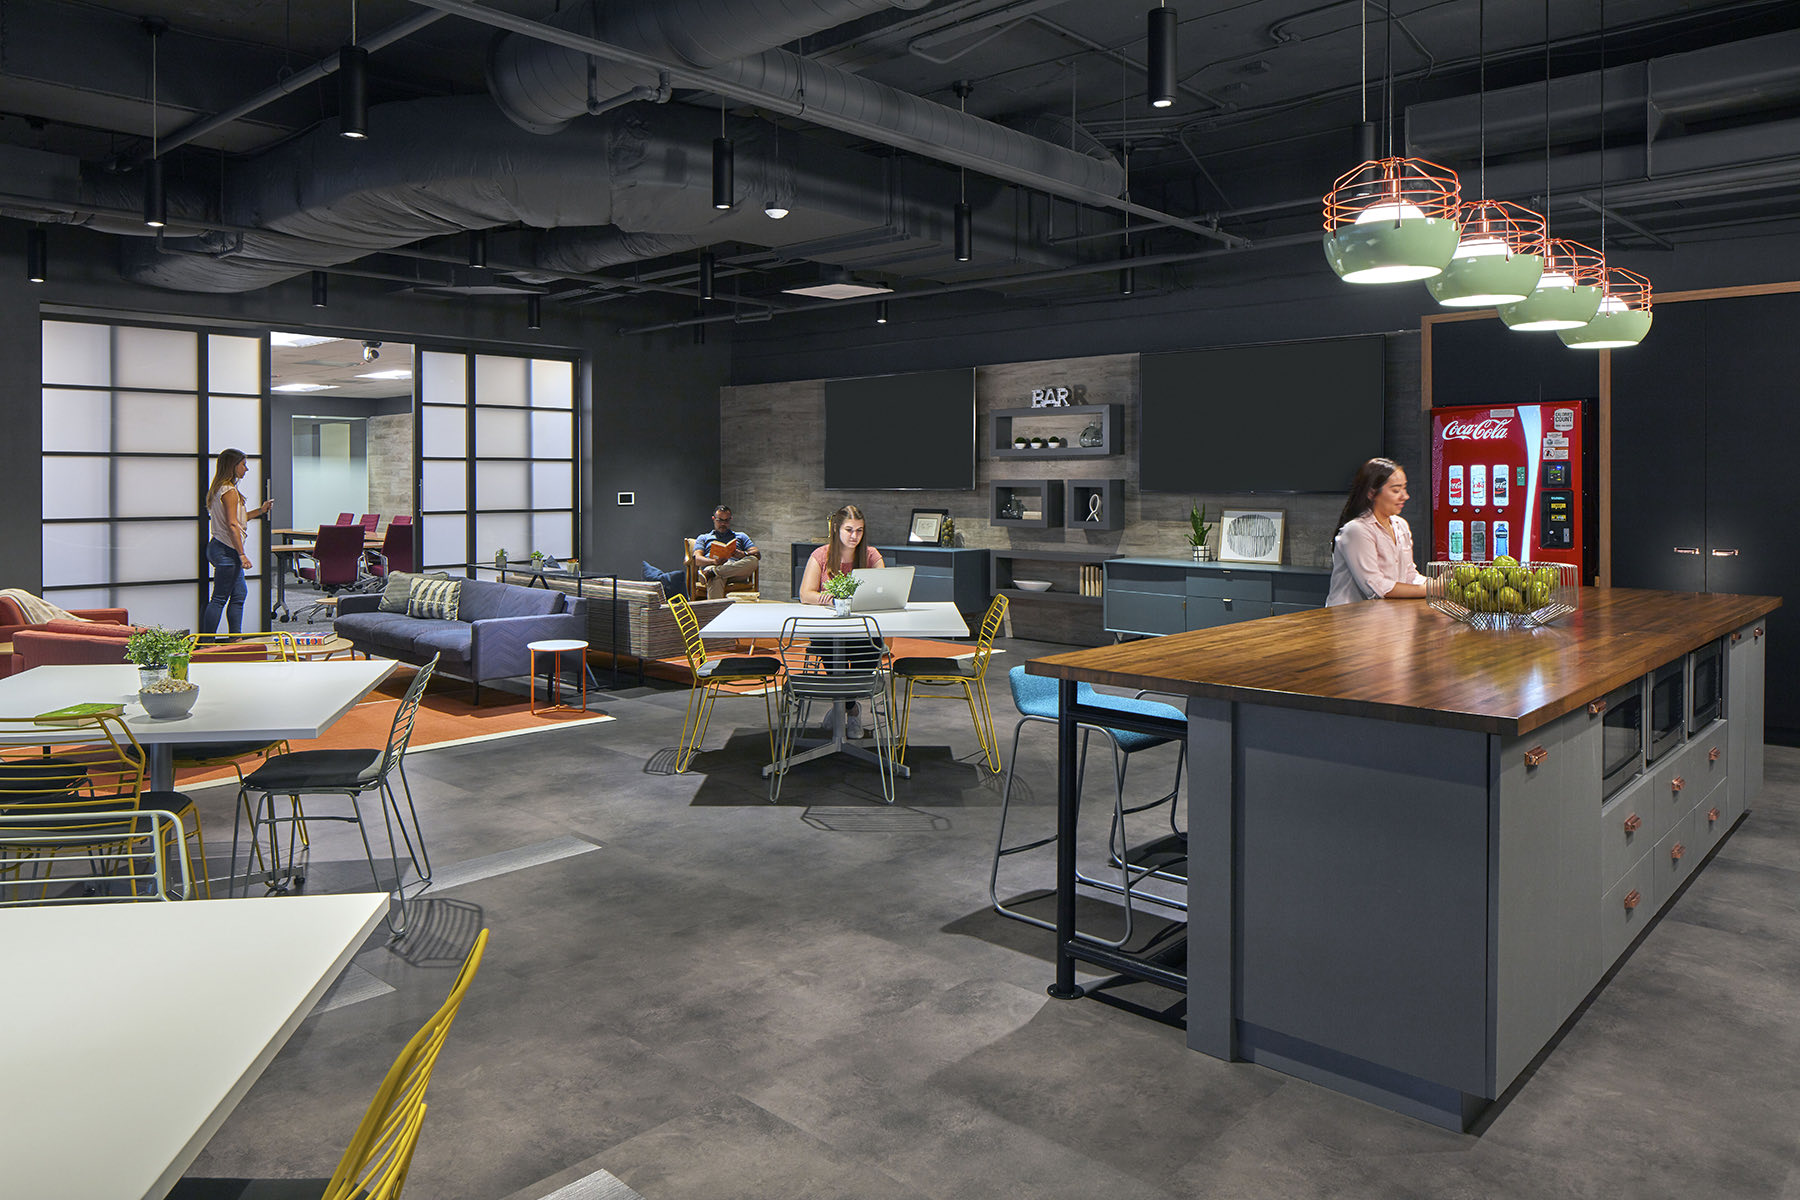 A Look Inside Tricentis’ New Atlanta Office